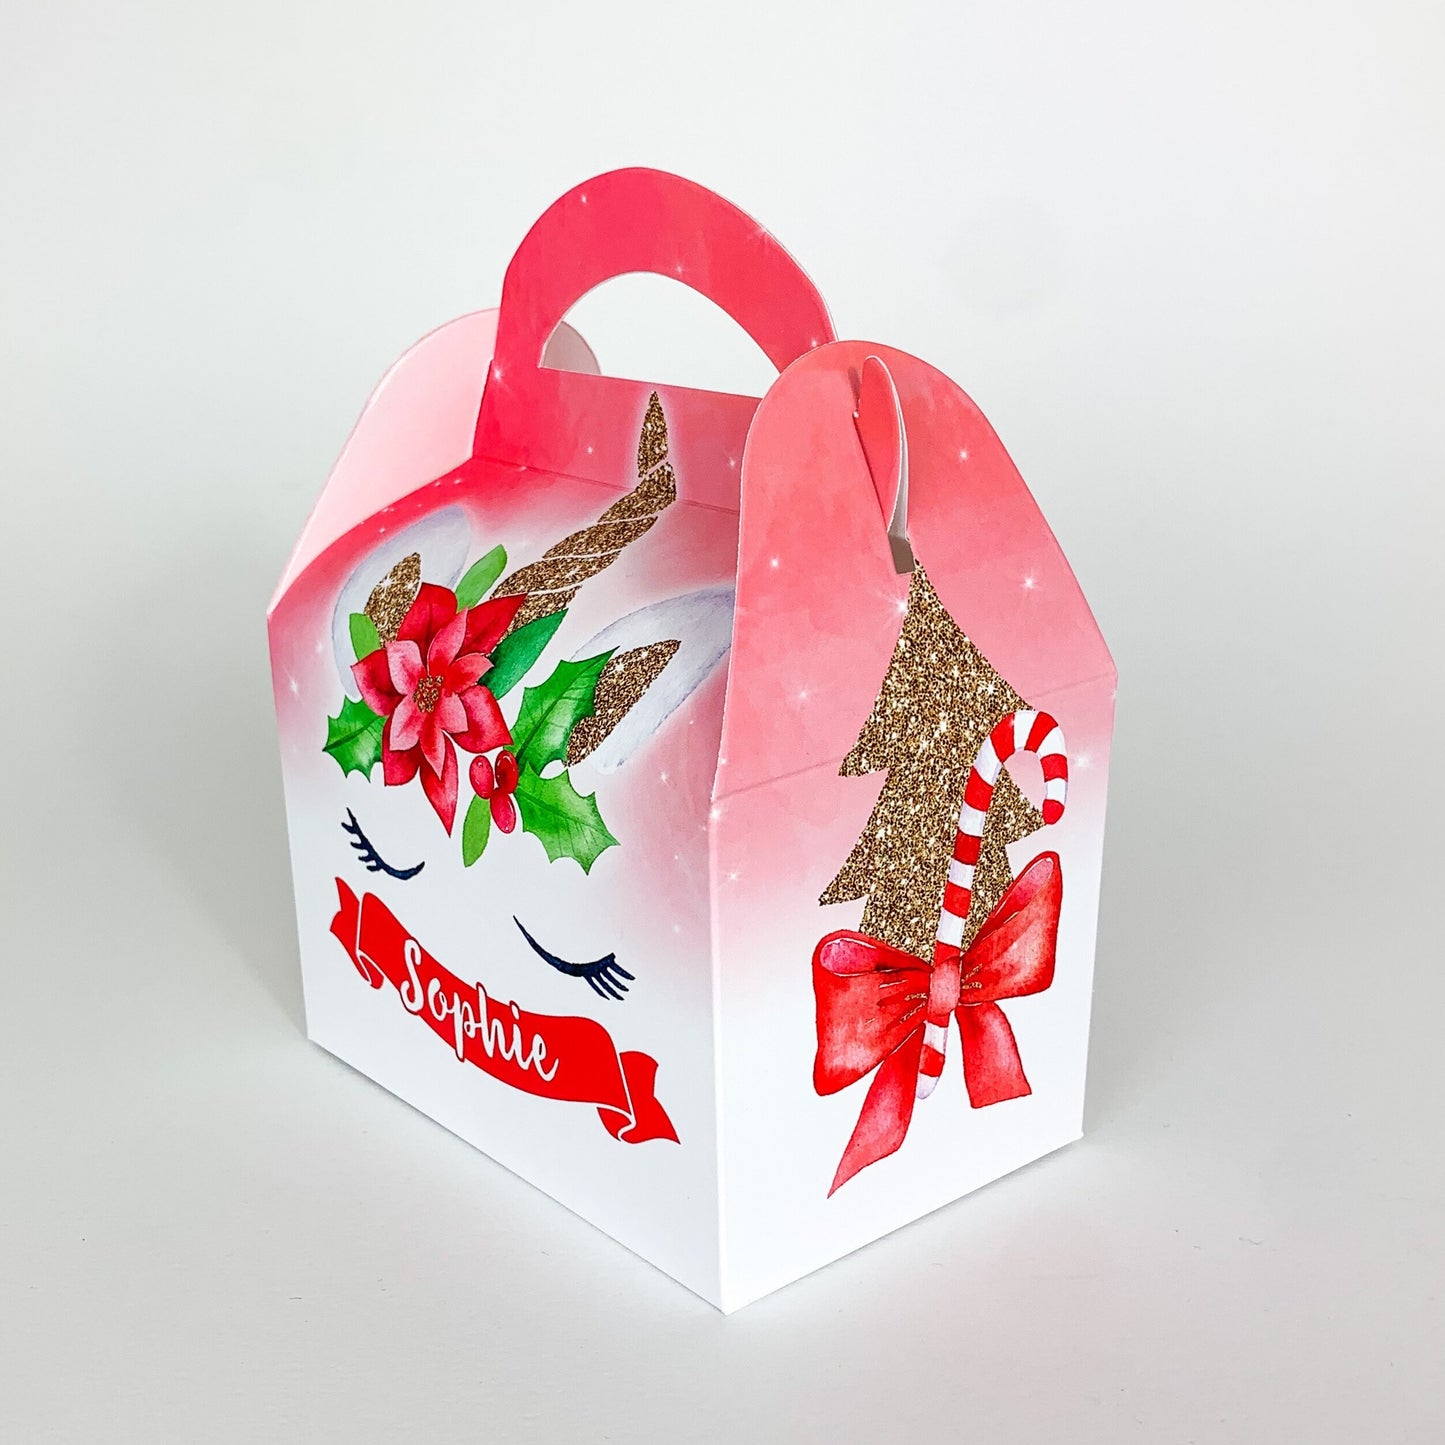 CHRISTMAS Personalised Unicorn Christmas Treat Boxes Advent Party Box favours